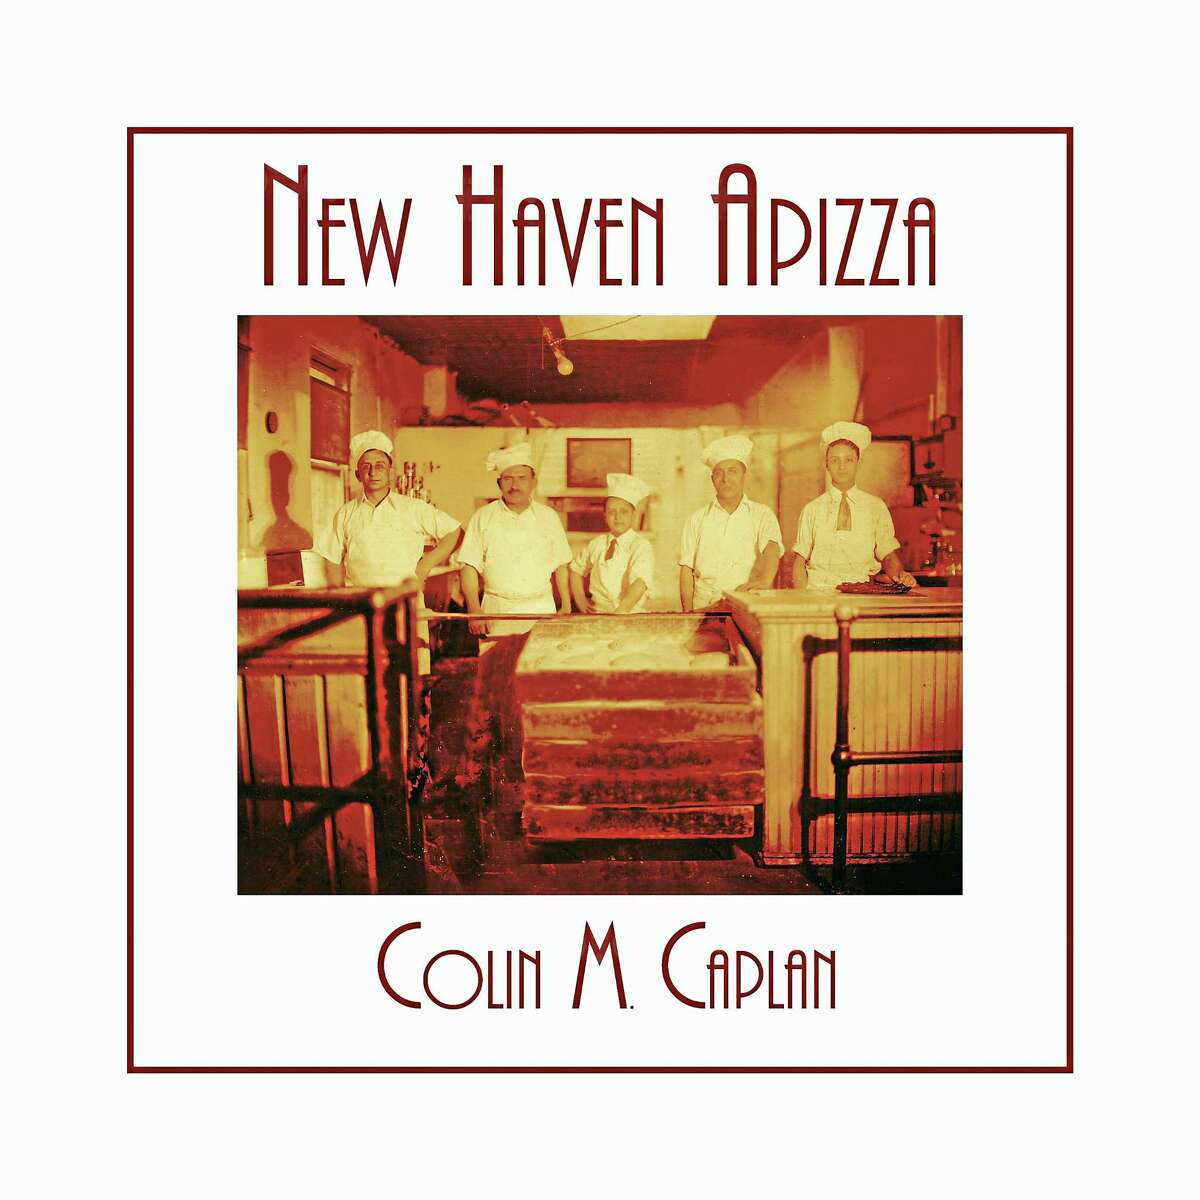 The cover of “New Haven Apizza” shows a view circa 1930 of Frank Pepe’s original pizzeria, at what is now The Spot. Left to right: Frank Pepe; his brother, Pietro Alessio Pepe; Frank’s nephew, Tony Consiglio; Frank’s cousin, Tommy Sicignano; and Frank’s nephew, Sally Consiglio, who later owned Sally’s Apizza.